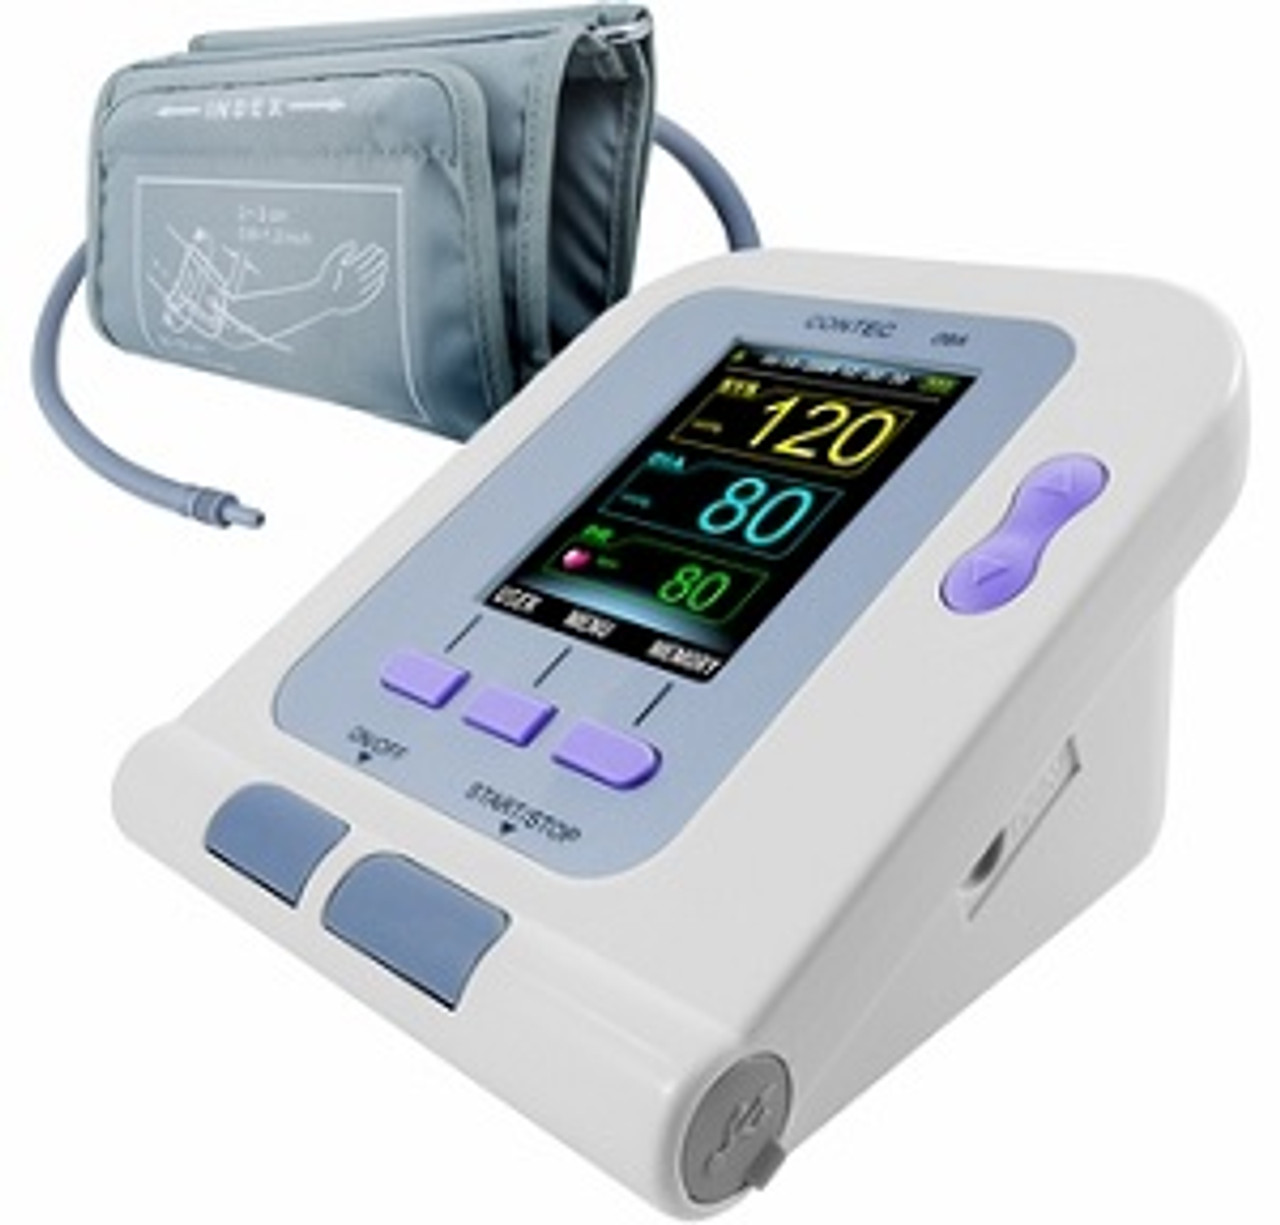 Blood Pressure Monitor - Contec 08A From 2511.0 @Josec Supplies